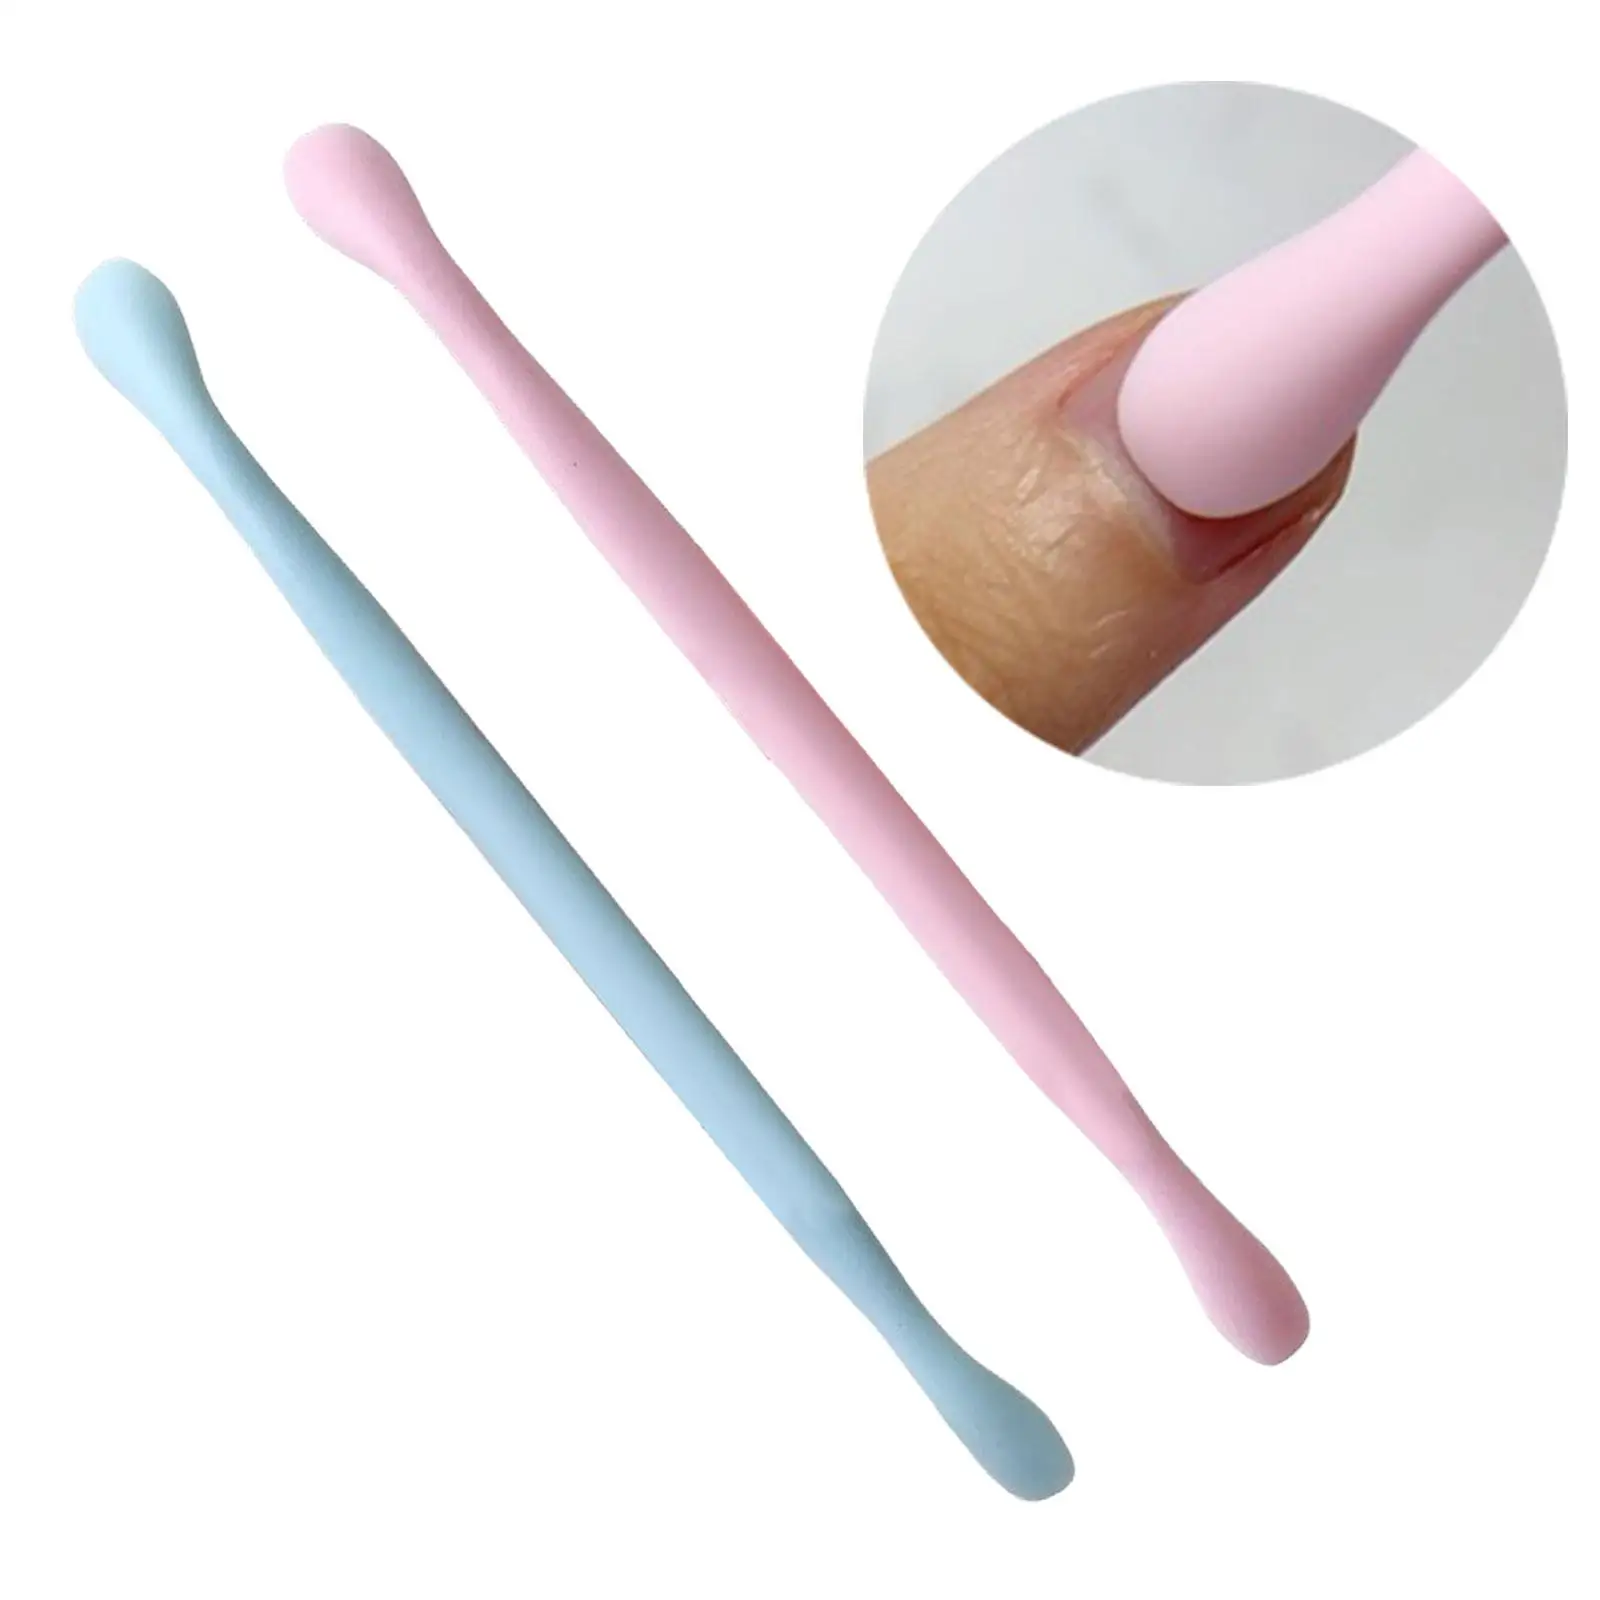 2Pcs Dual-End Nail Cuticle Pusher Remover Nail Art Manicure Tool Dead Skin Push Remover Pro Cuticle Trimmer Nail File Care Tool